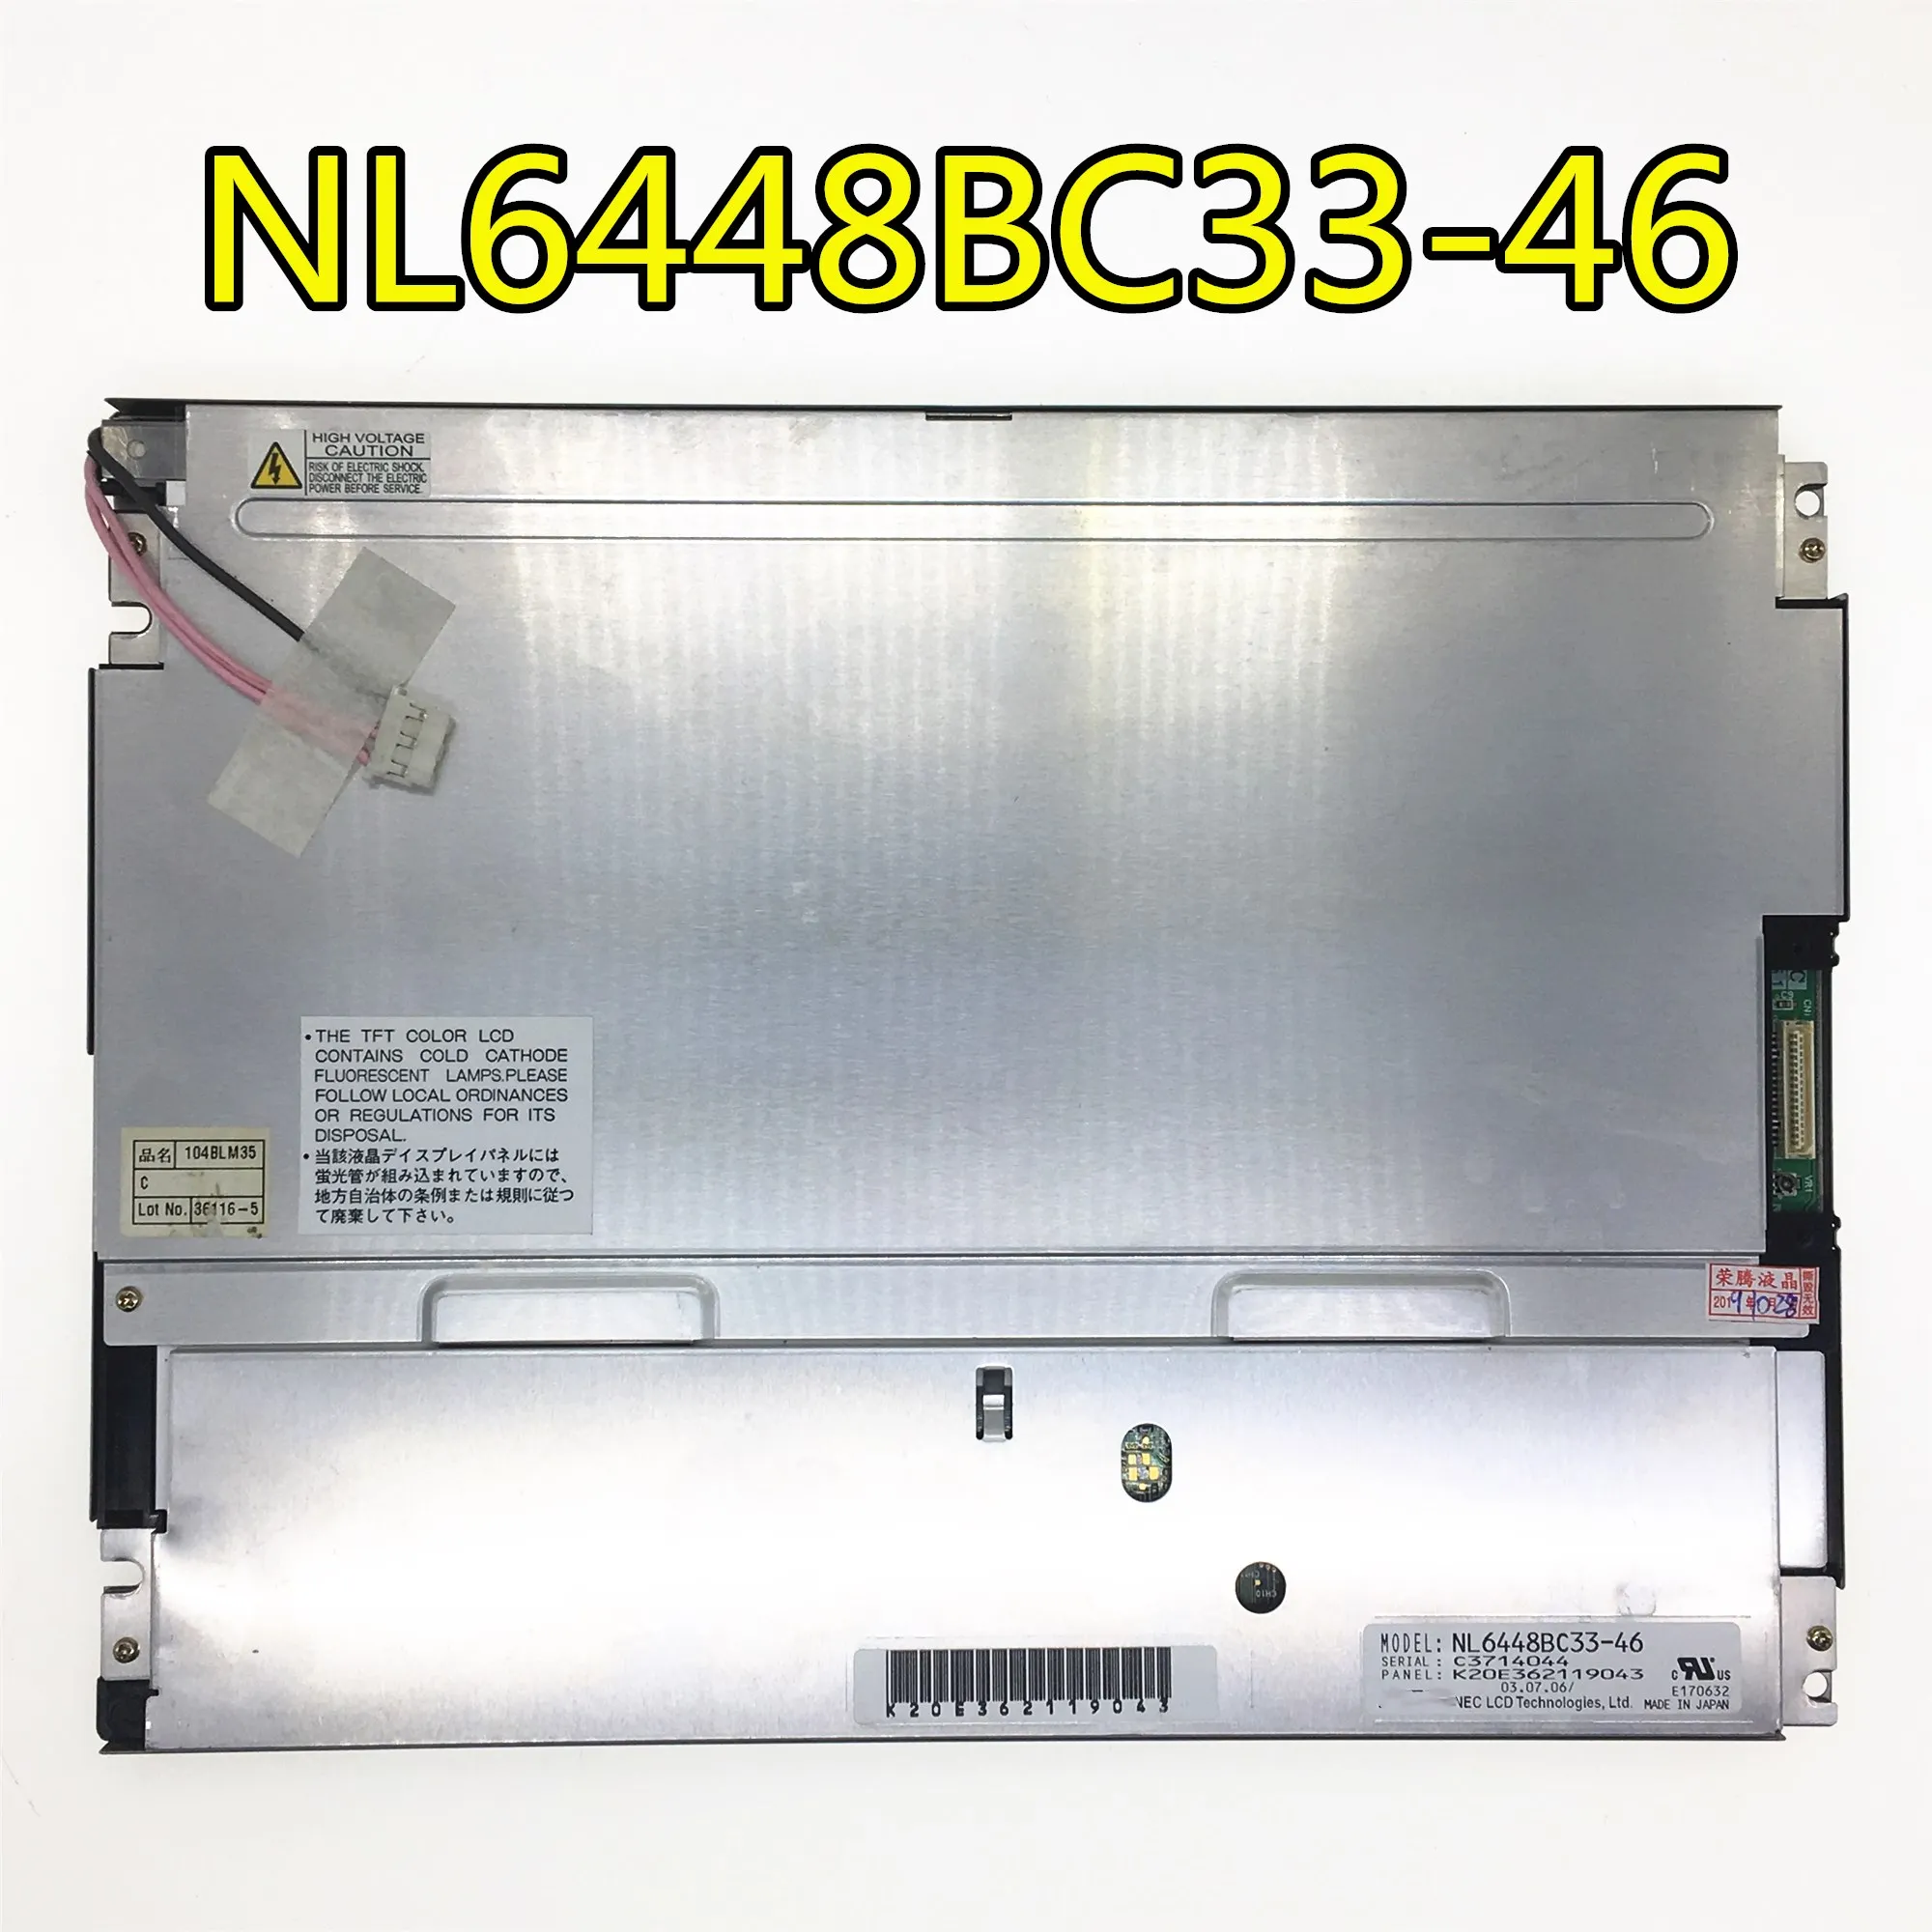 

Can provide test video , 90 days warranty 10.4" 640*480 a-Si TFT-LCD panel NL6448BC33-46